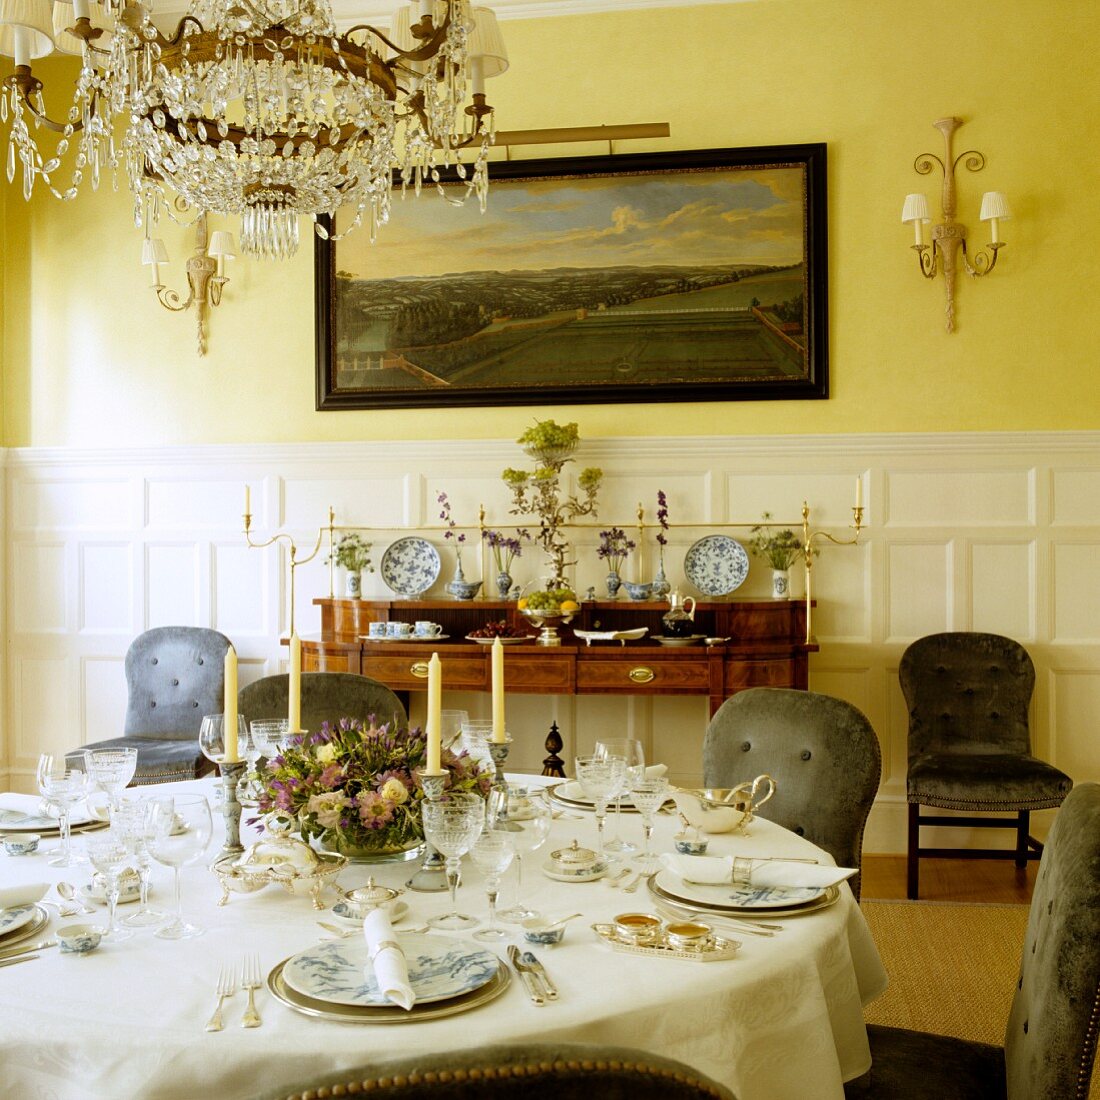 Festively set dinner table in grand dining room with yellow-painted walls and half-height, white wood panelling